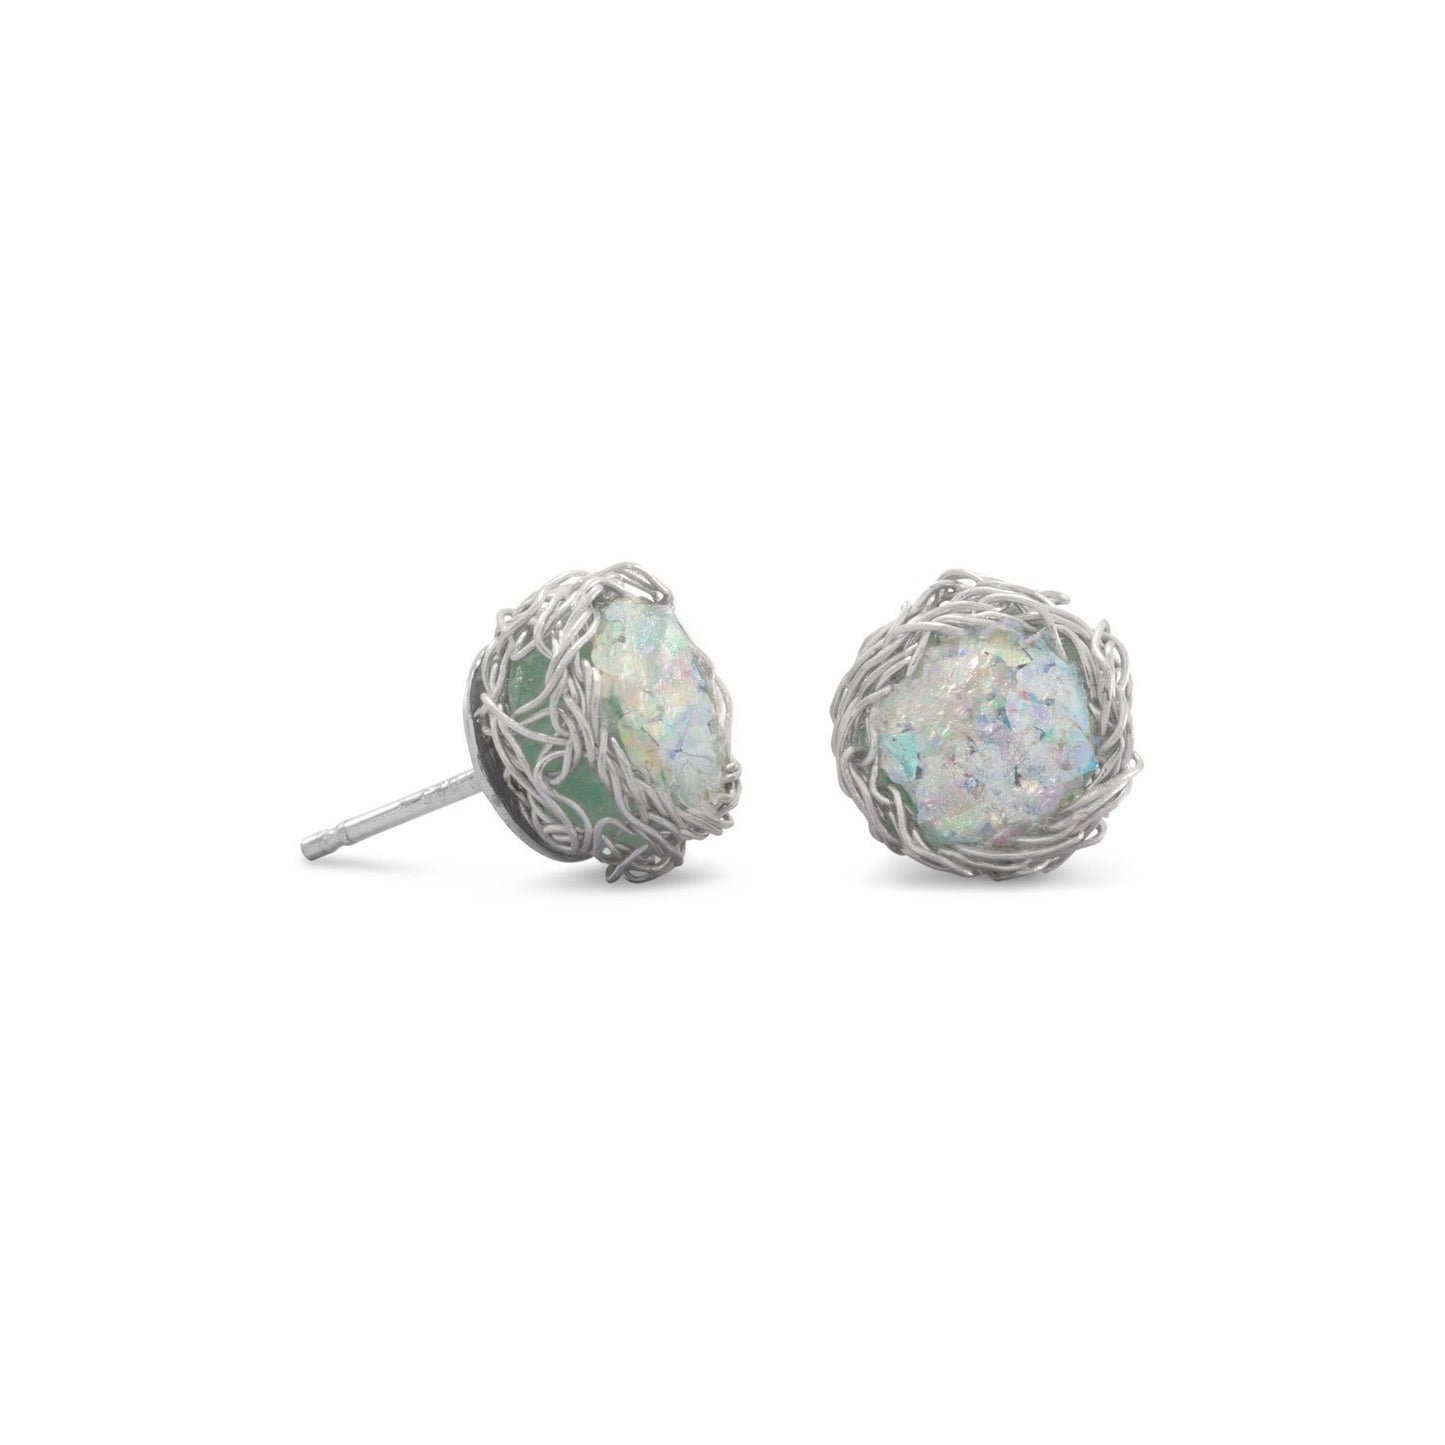 Round Ancient Roman Glass Stud Earrings with Woven Wire Mesh